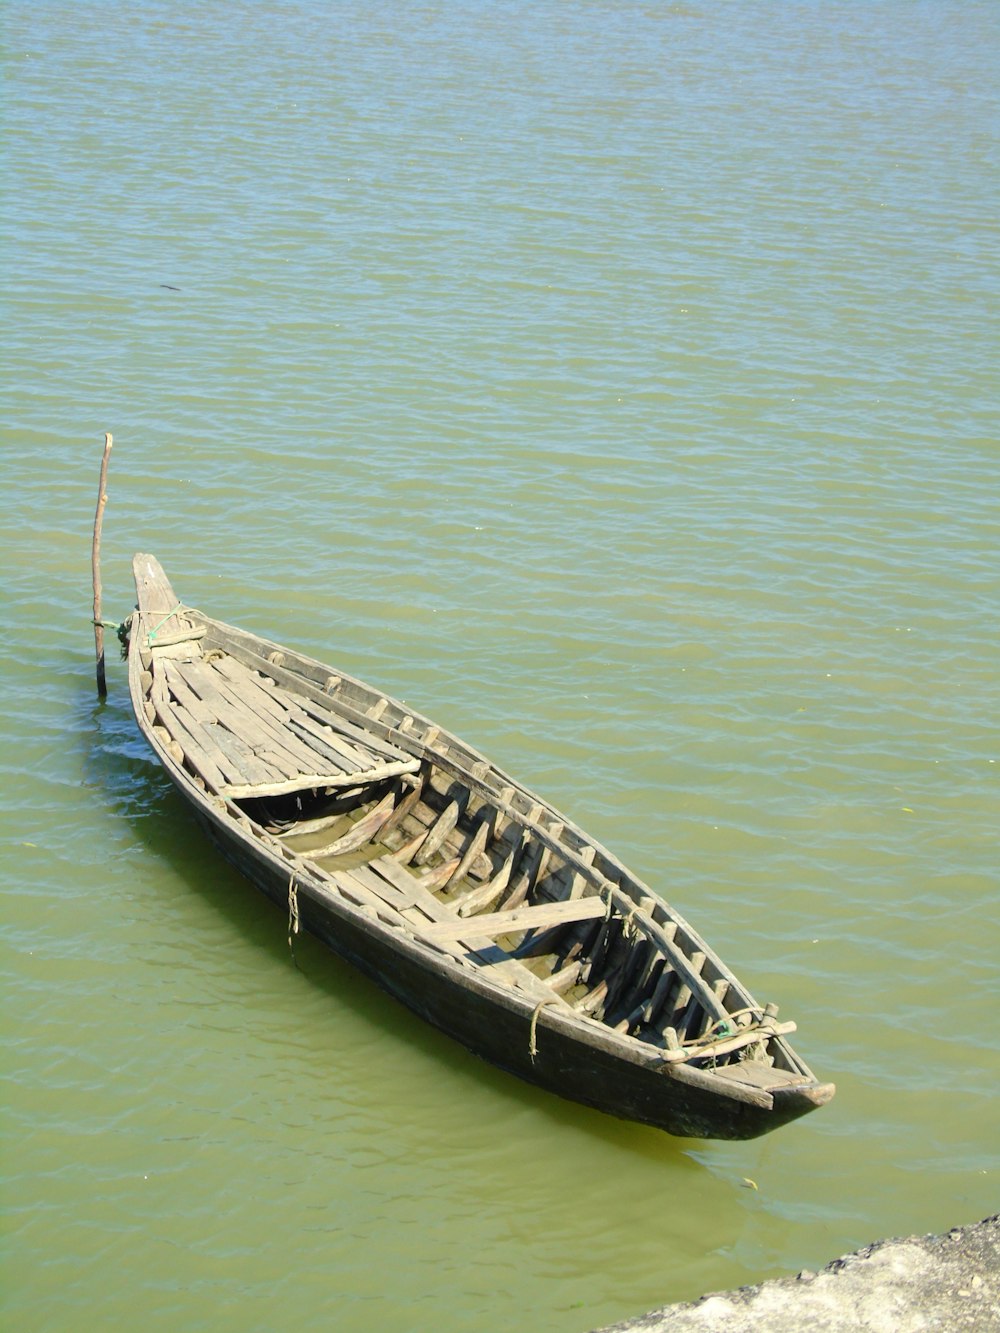 A small wooden boat floating on top of a lake photo – Free Watercraft Image  on Unsplash